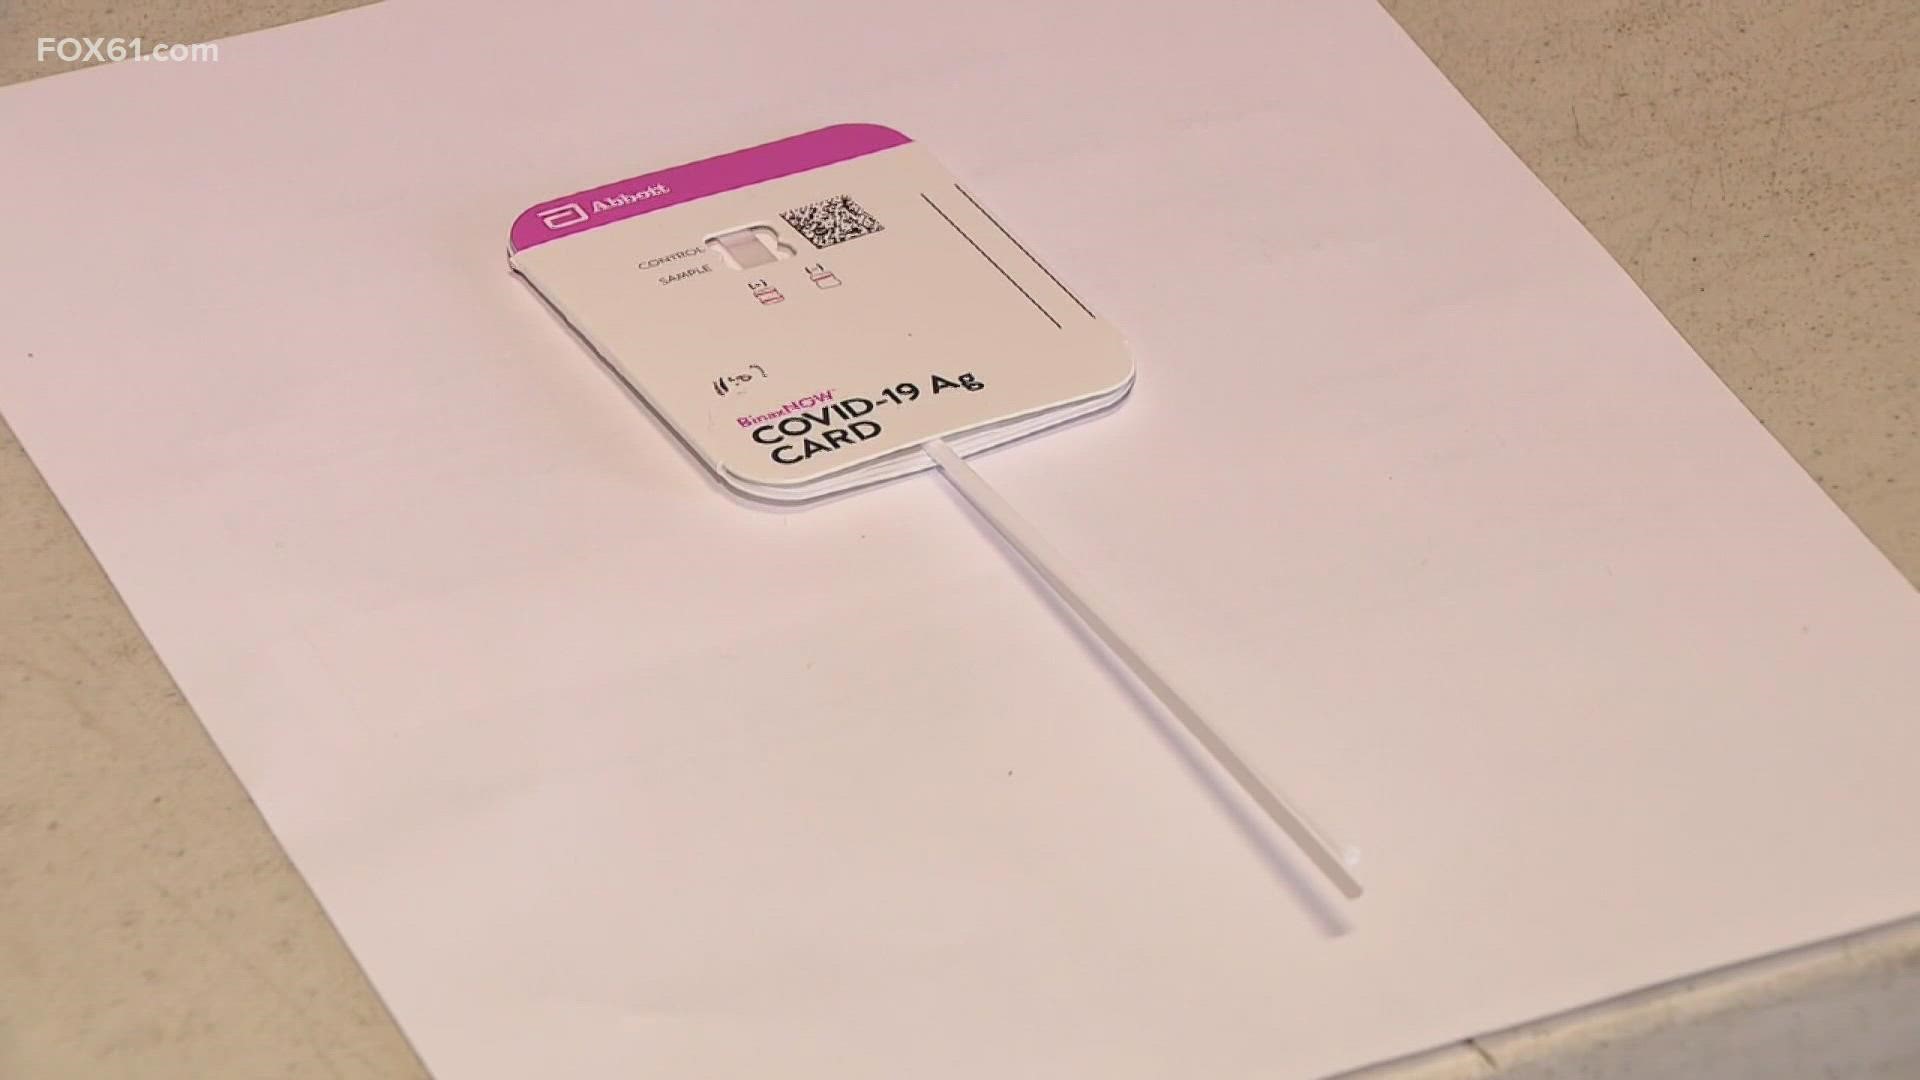 The City of Hartford ordered its own at-home COVID test kits for its residents. The State of Connecticut is still waiting on its shipment of kits for its communities